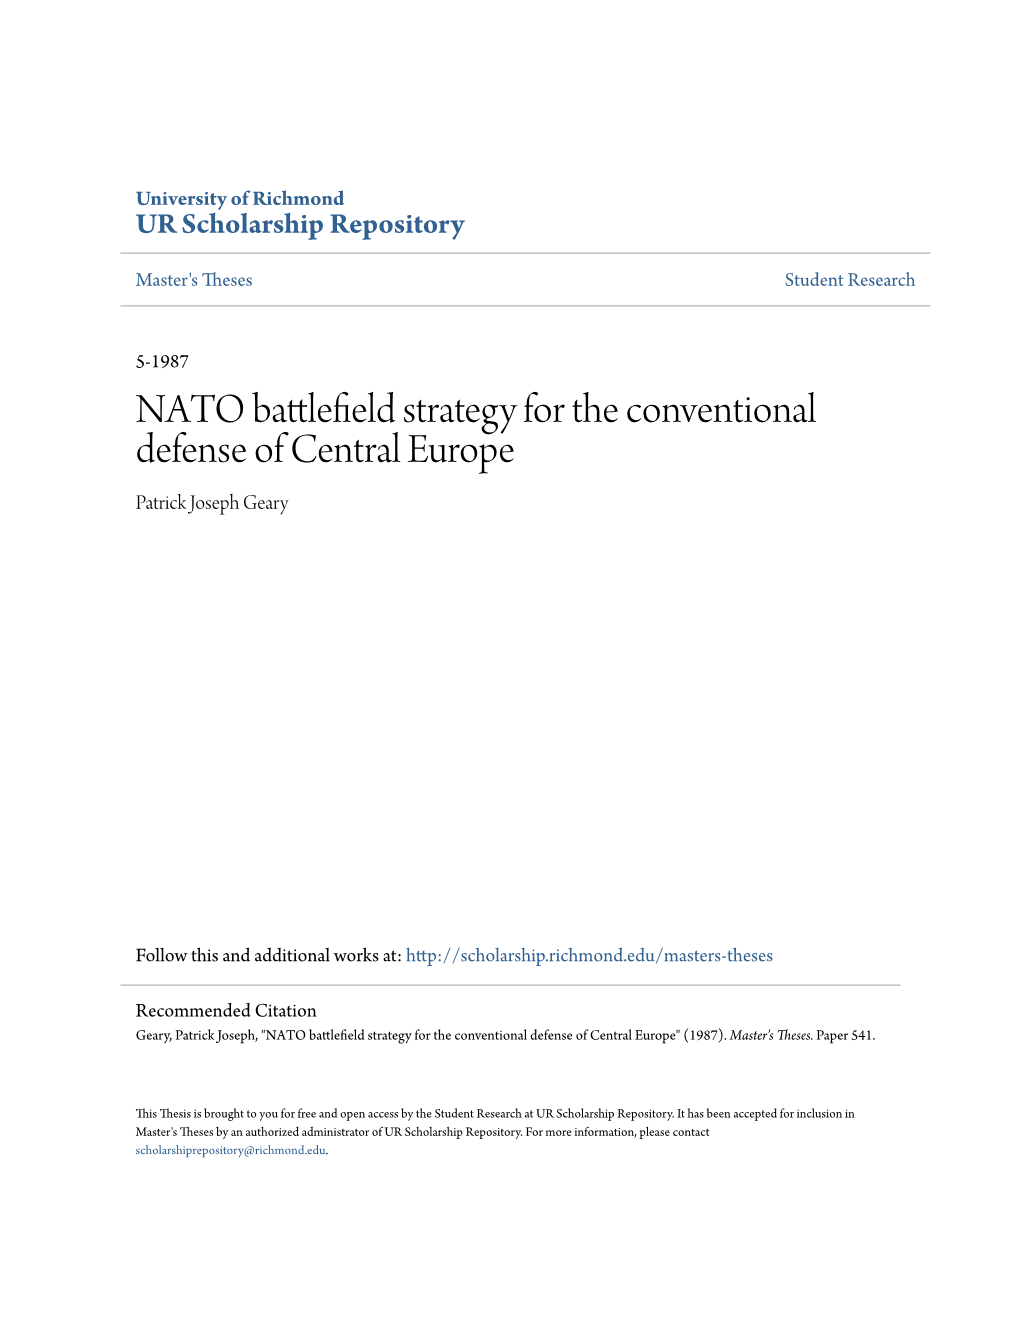 NATO Battlefield Strategy for the Conventional Defense of Central Europe" (1987)